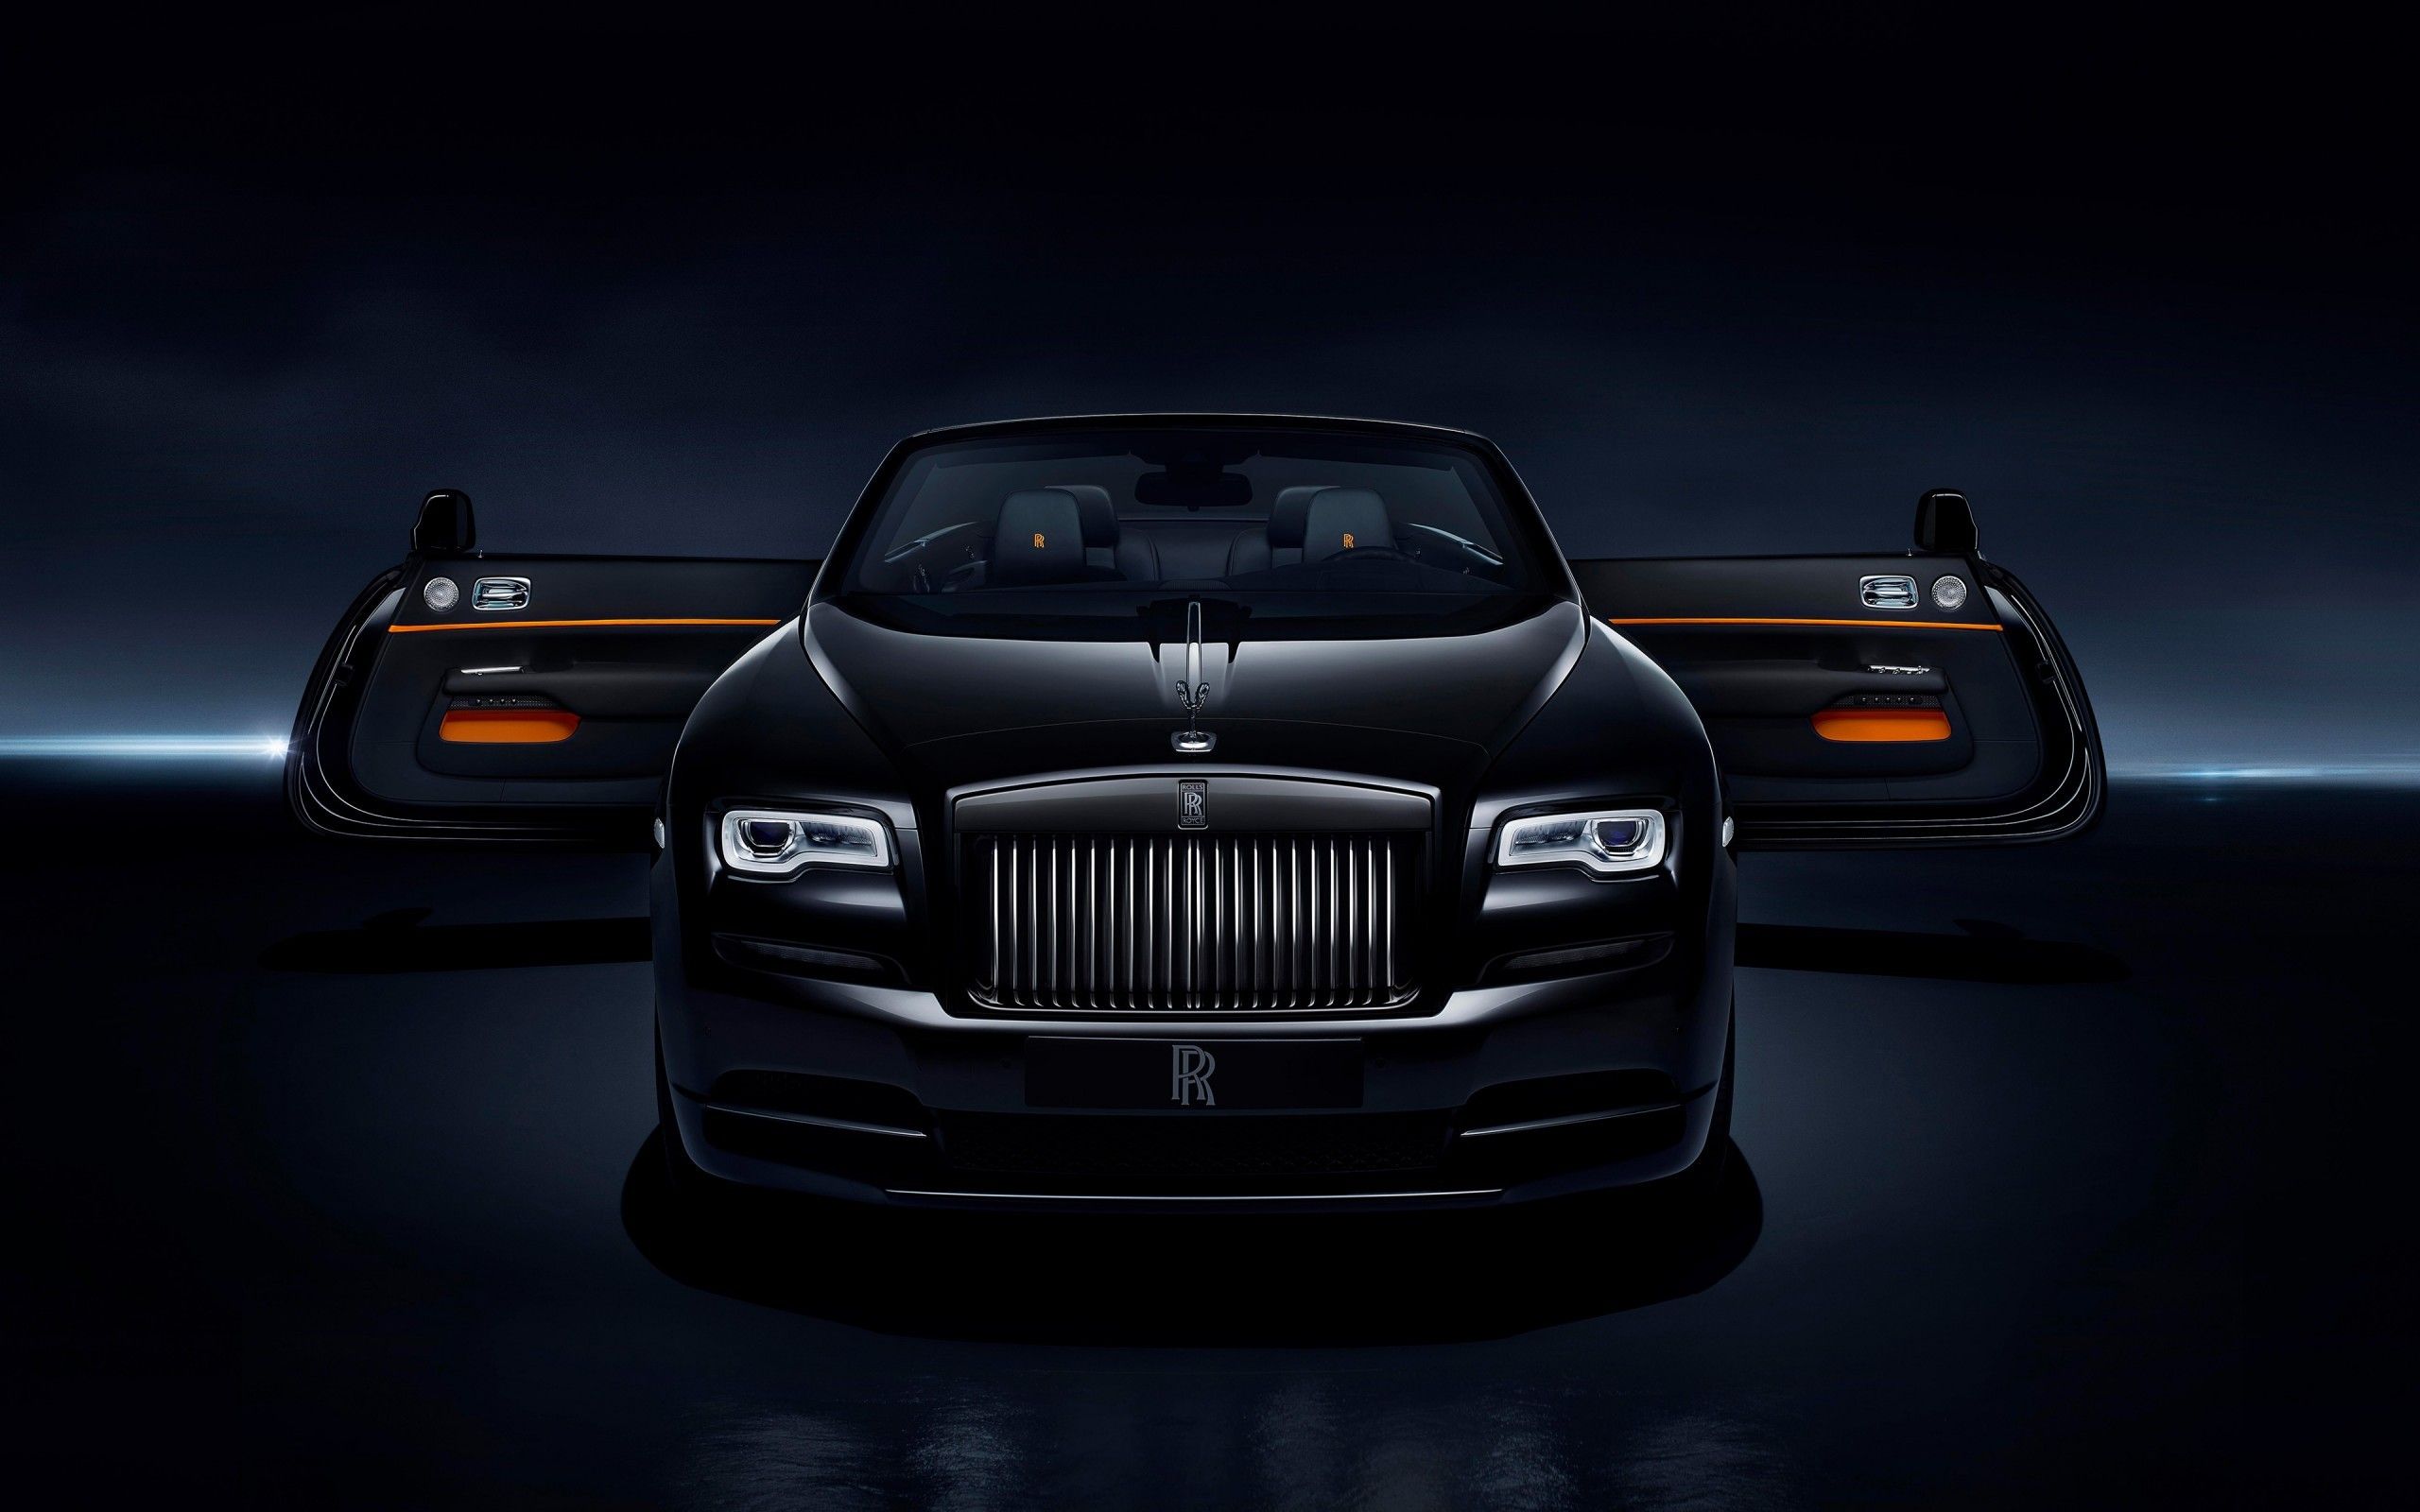 Download 2560x1600 Rolls Royce, Front View, Black, Luxury, Cars Wallpaper For MacBook Pro 13 Inch